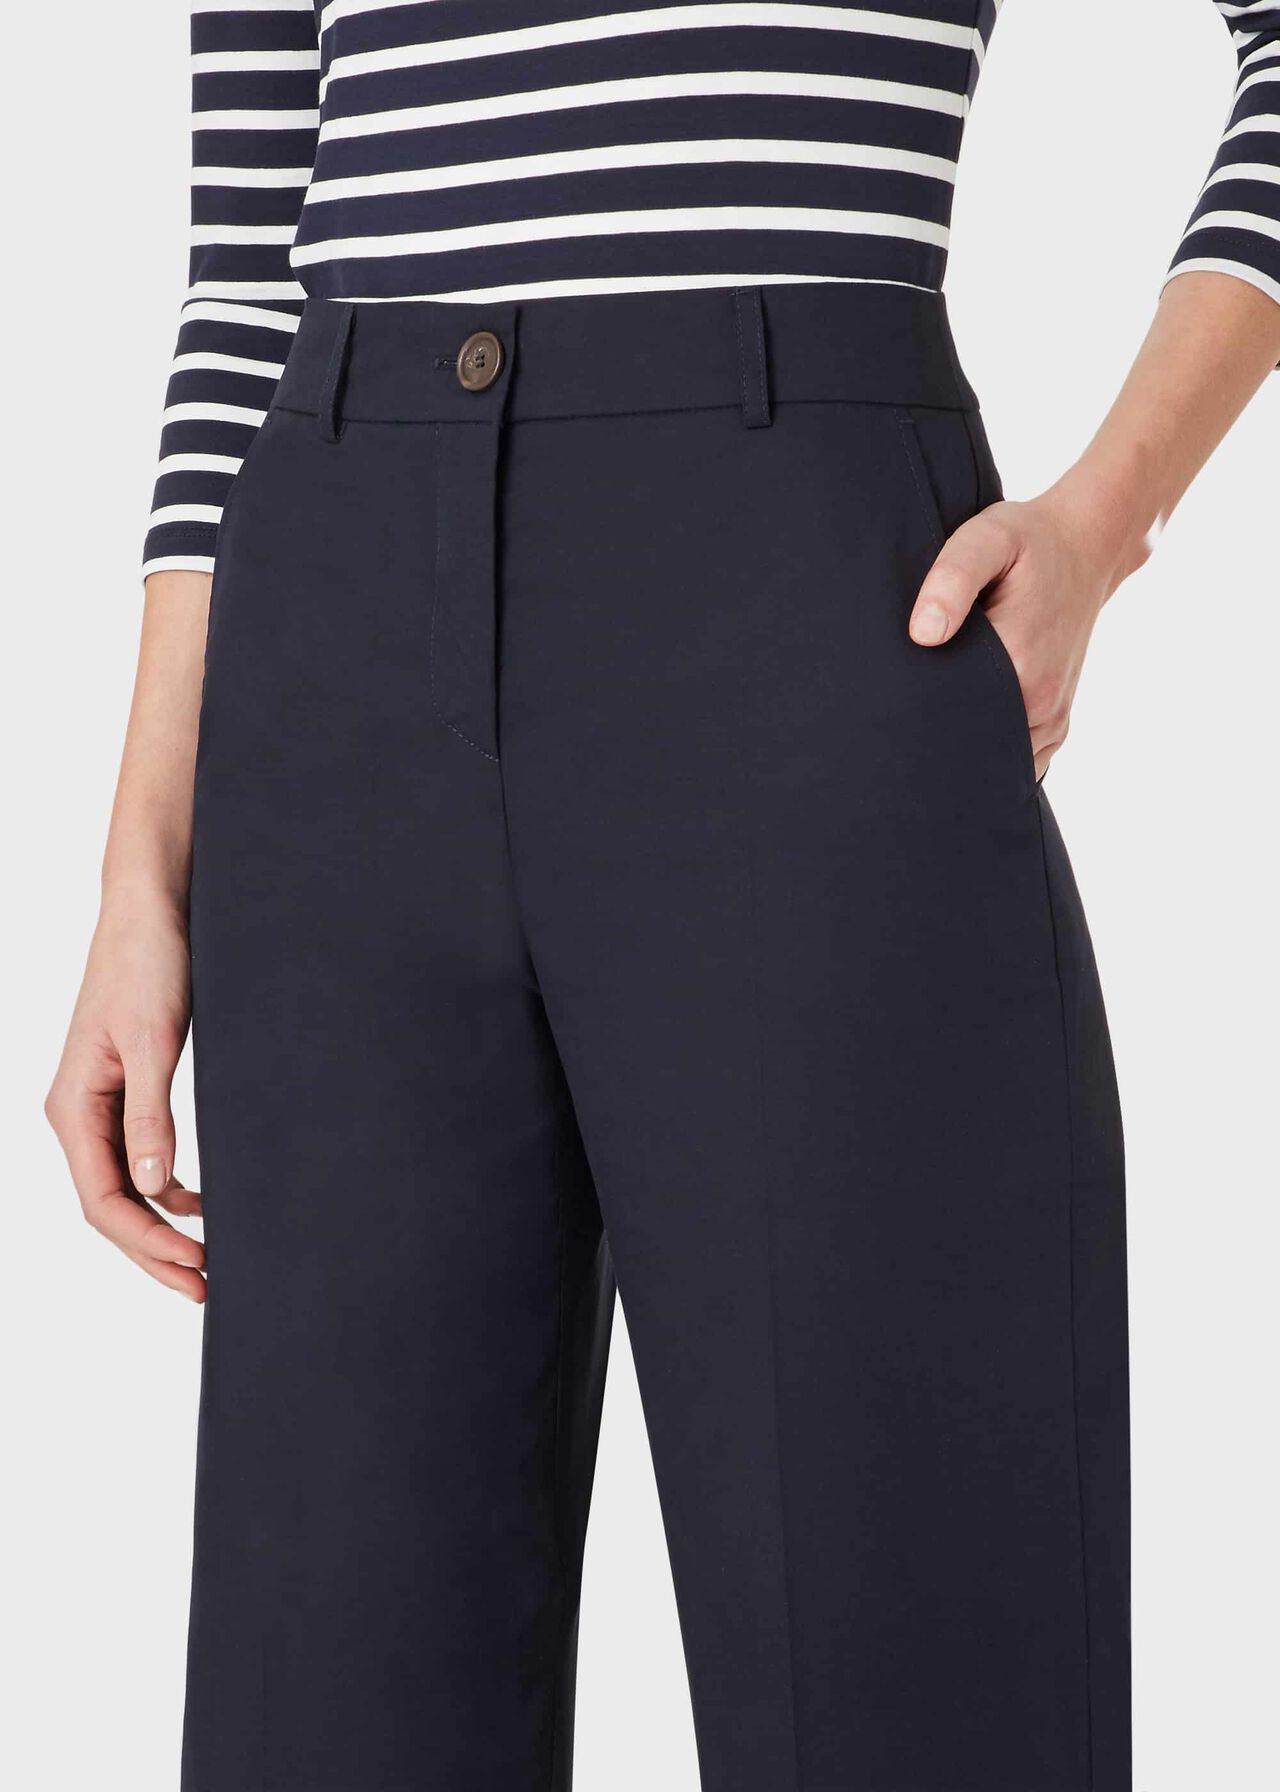 Marlena Cotton Blend Wide Leg Chinos With Stretch, Navy, hi-res